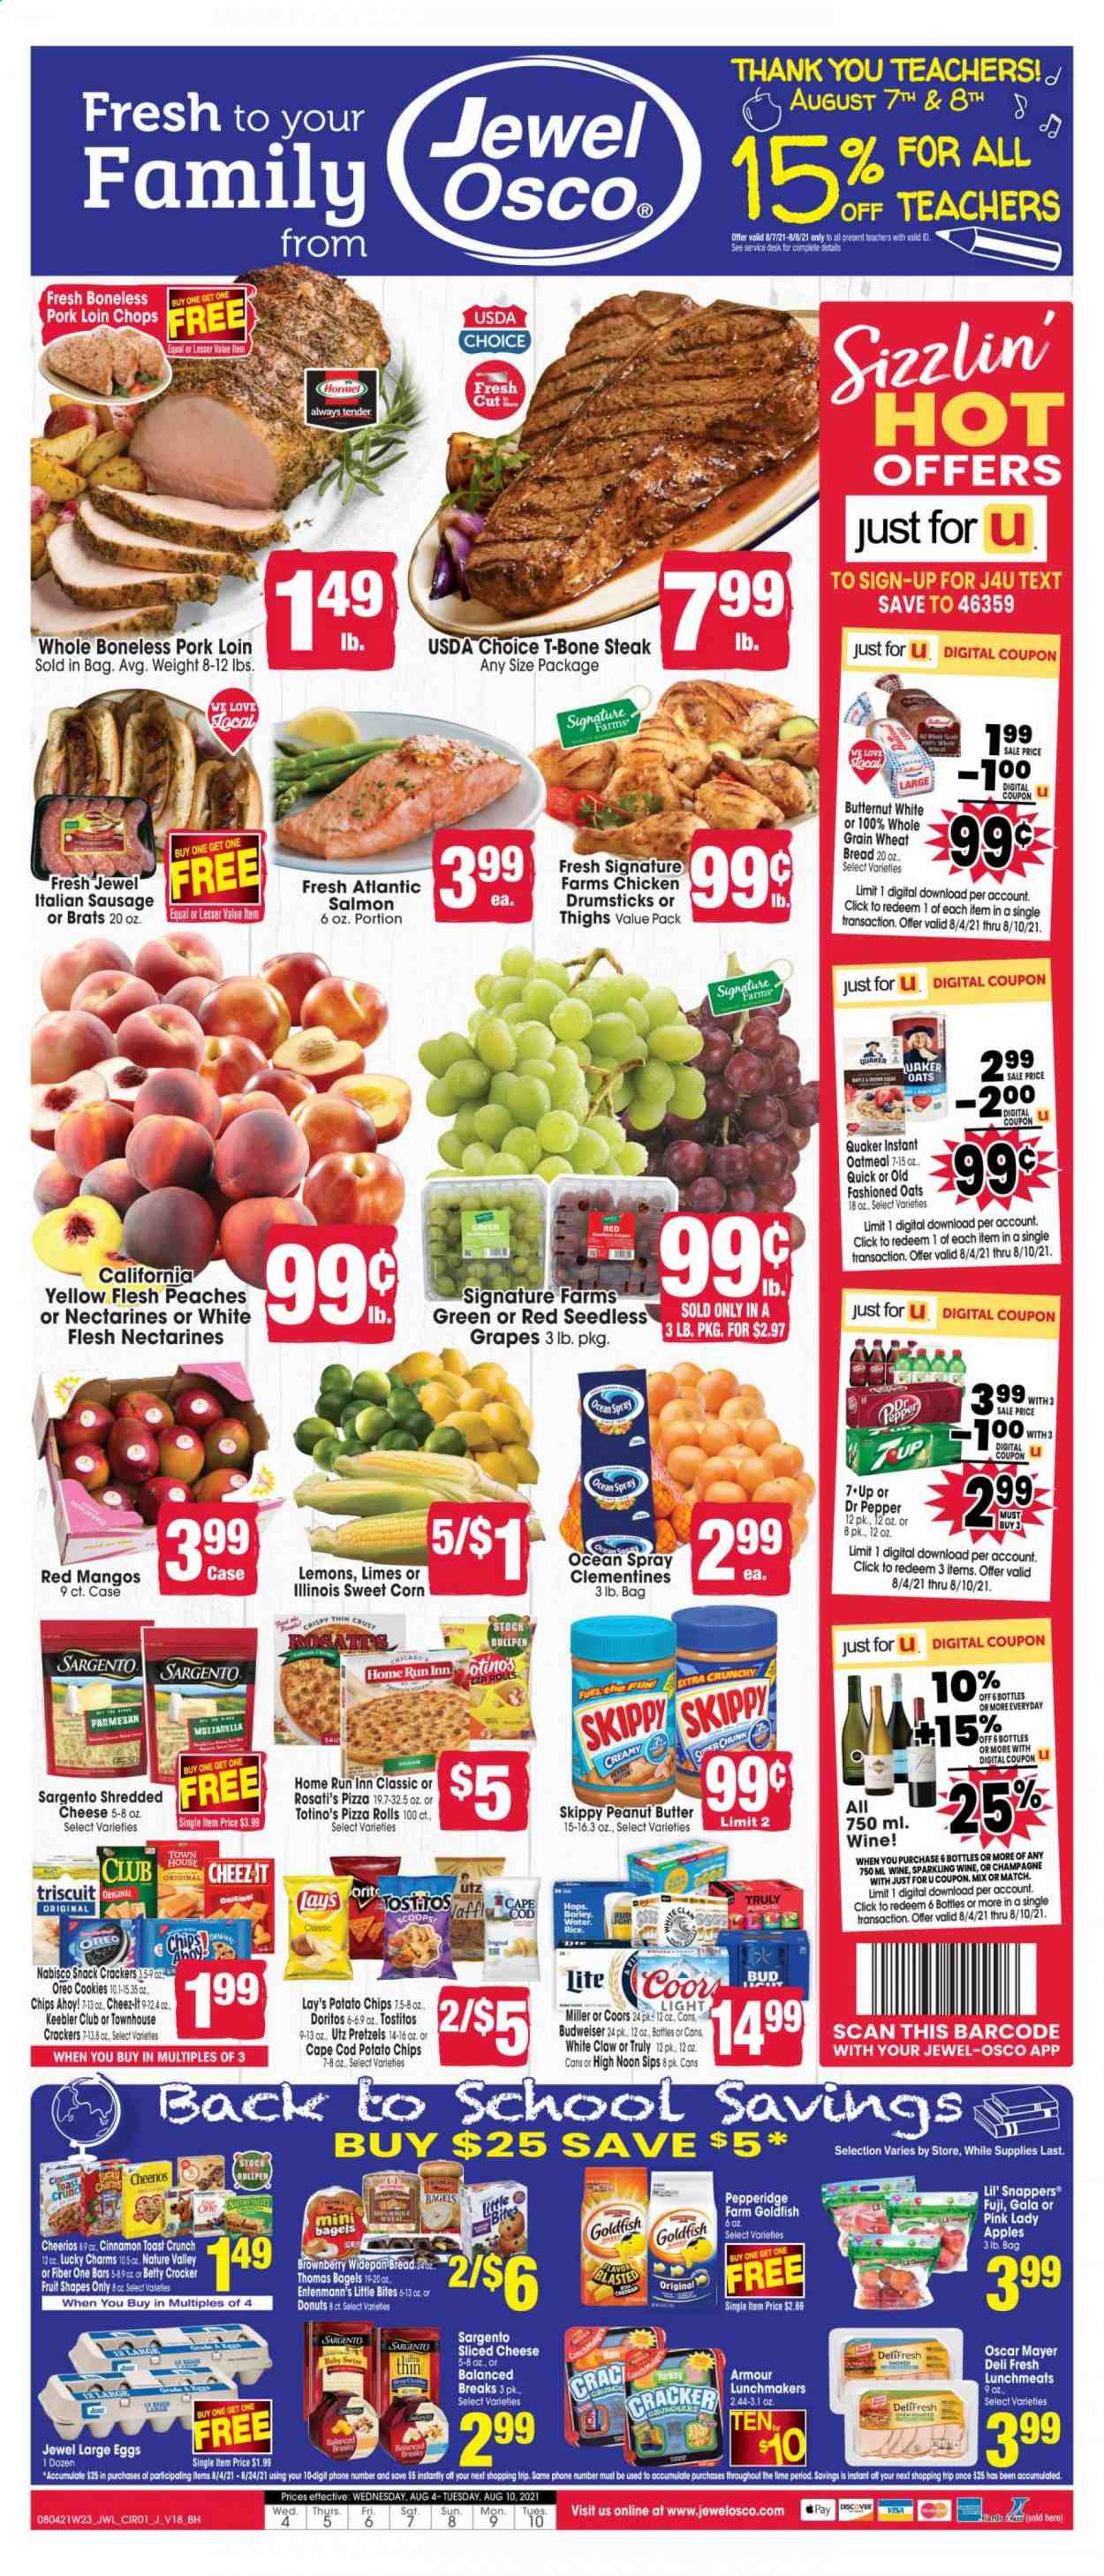 thumbnail - Jewel Osco Flyer - 08/04/2021 - 08/10/2021 - Sales products - Budweiser, Coors, bagels, wheat bread, pretzels, pizza rolls, donut, Entenmann's, corn, sweet corn, apples, Gala, grapes, limes, mango, Pink Lady, cod, salmon, Quaker, Hormel, ham, Oscar Mayer, sausage, italian sausage, lunch meat, shredded cheese, sliced cheese, Sargento, Oreo, large eggs, butter, cookies, snack, crackers, Chips Ahoy!, Little Bites, Keebler, Doritos, potato chips, chips, Lay’s, Goldfish, Tostitos, oatmeal, Cheerios, Nature Valley, Fiber One, cinnamon, Dr. Pepper, 7UP, sparkling wine, champagne, wine, White Claw, TRULY, beer, Miller, chicken drumsticks, beef meat, t-bone steak, steak, pork chops, pork loin, pork meat, butternut squash, clementines, nectarines, lemons, peaches. Page 1.